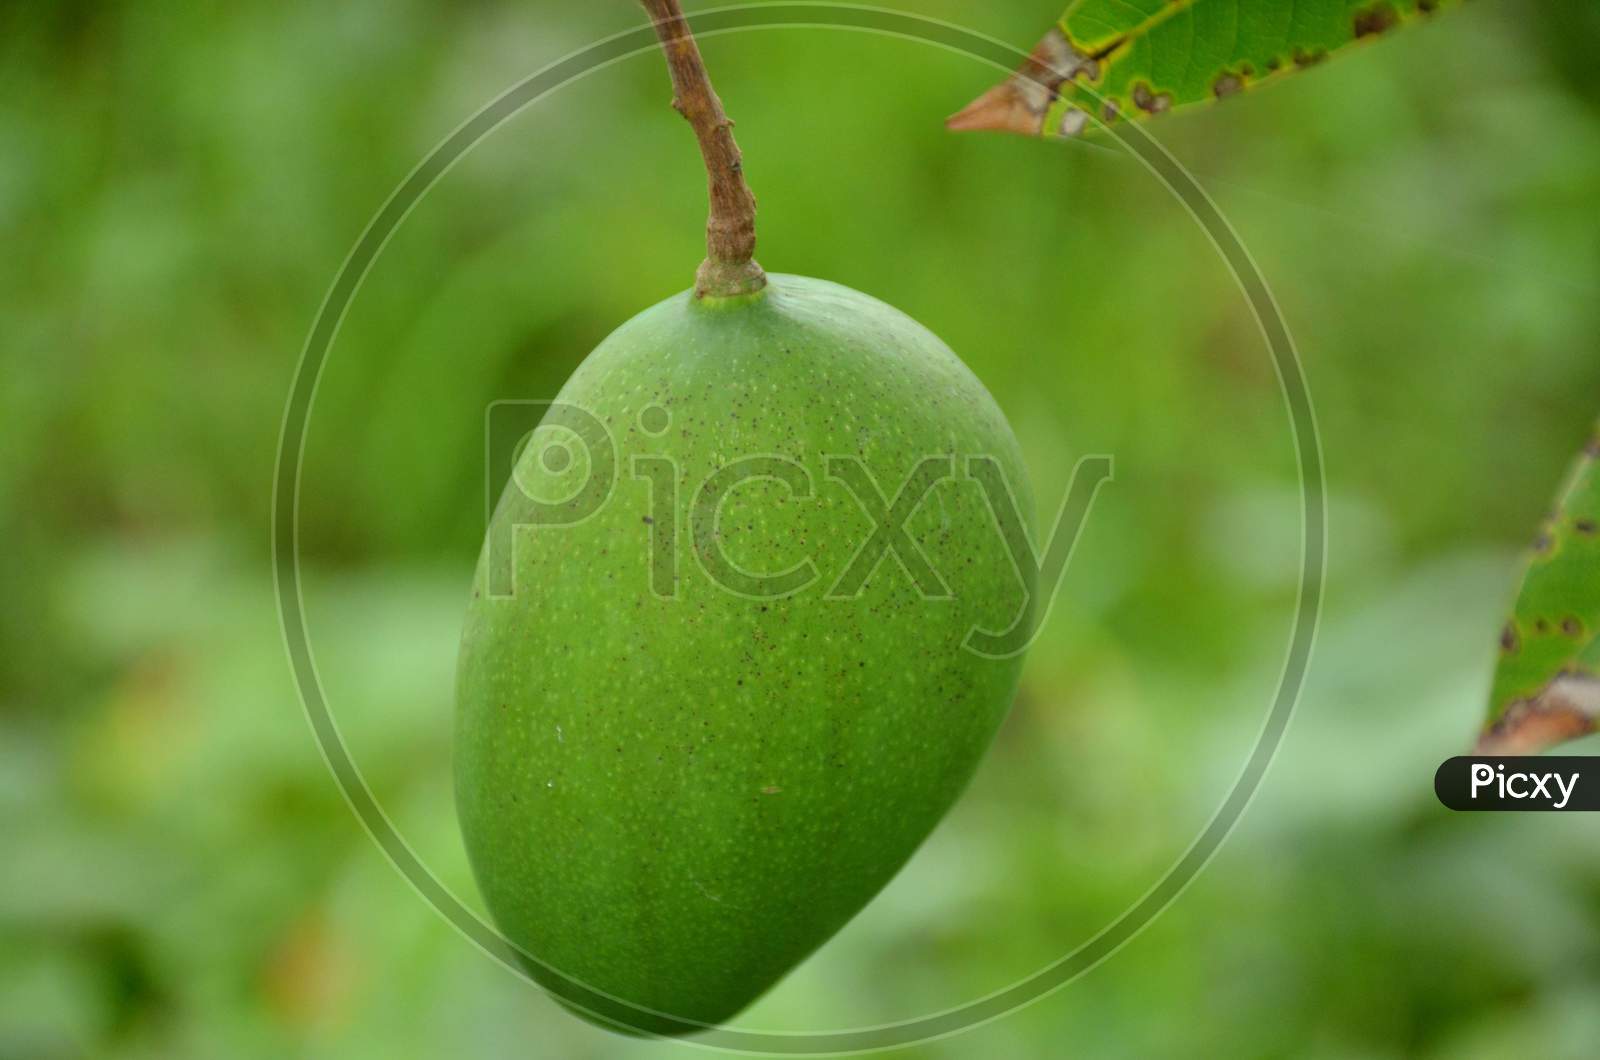 the ripe green mango with leaves and branch in the garden.